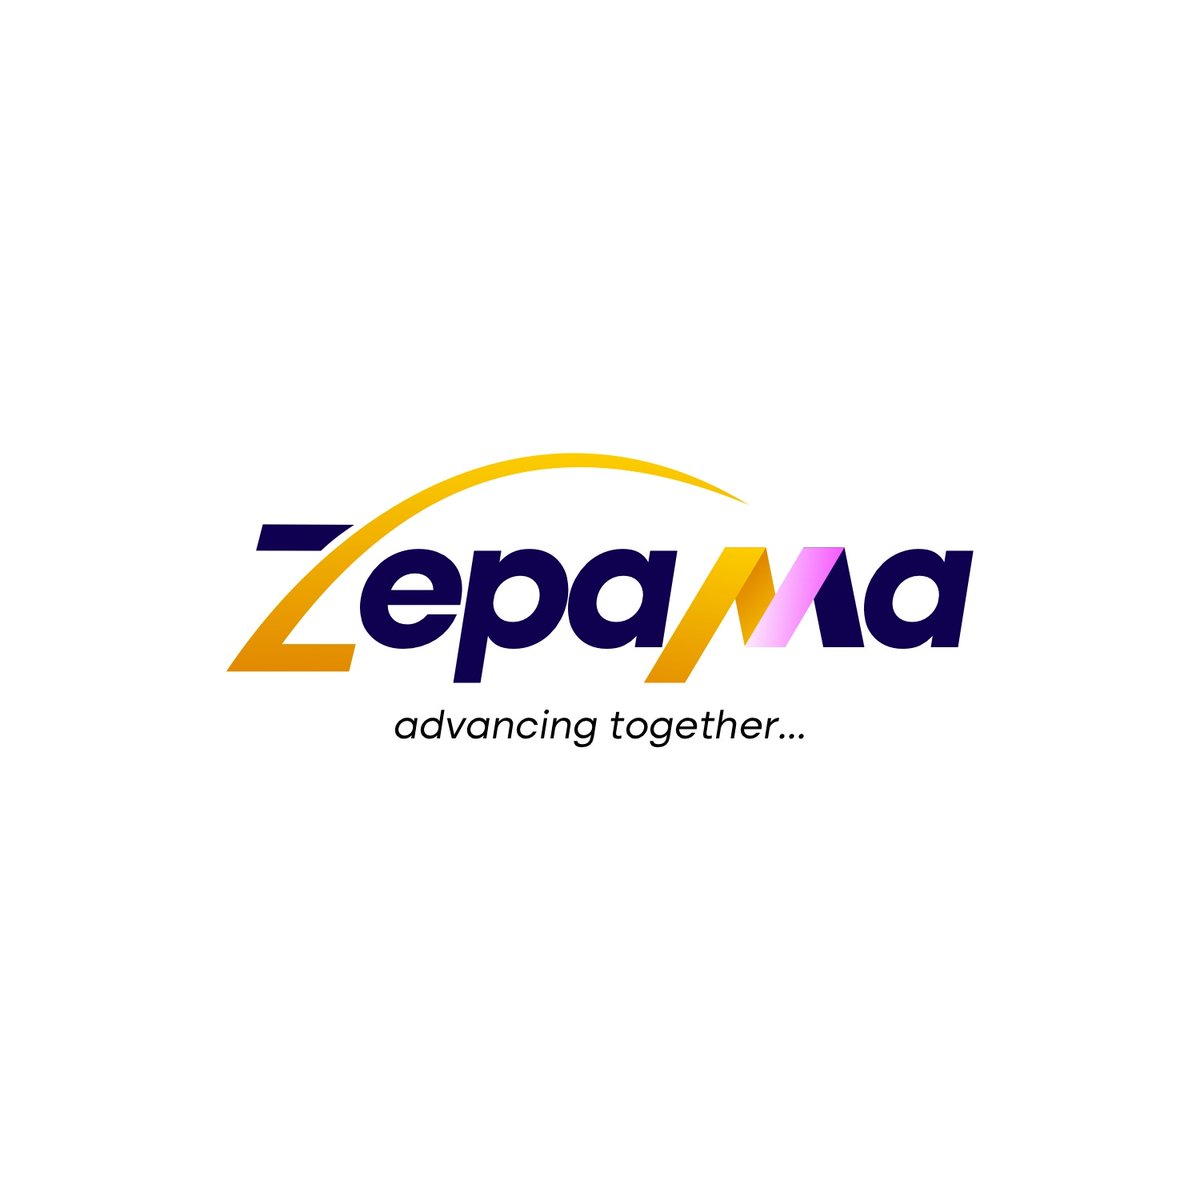 🚀 Introducing Zepama: The ultimate app for students community first, then everyone else! Co-trek, co-study, and co-game your way to fun and savings. 📚🏞️🎮 #ZepamaLaunch #StudentCommunity